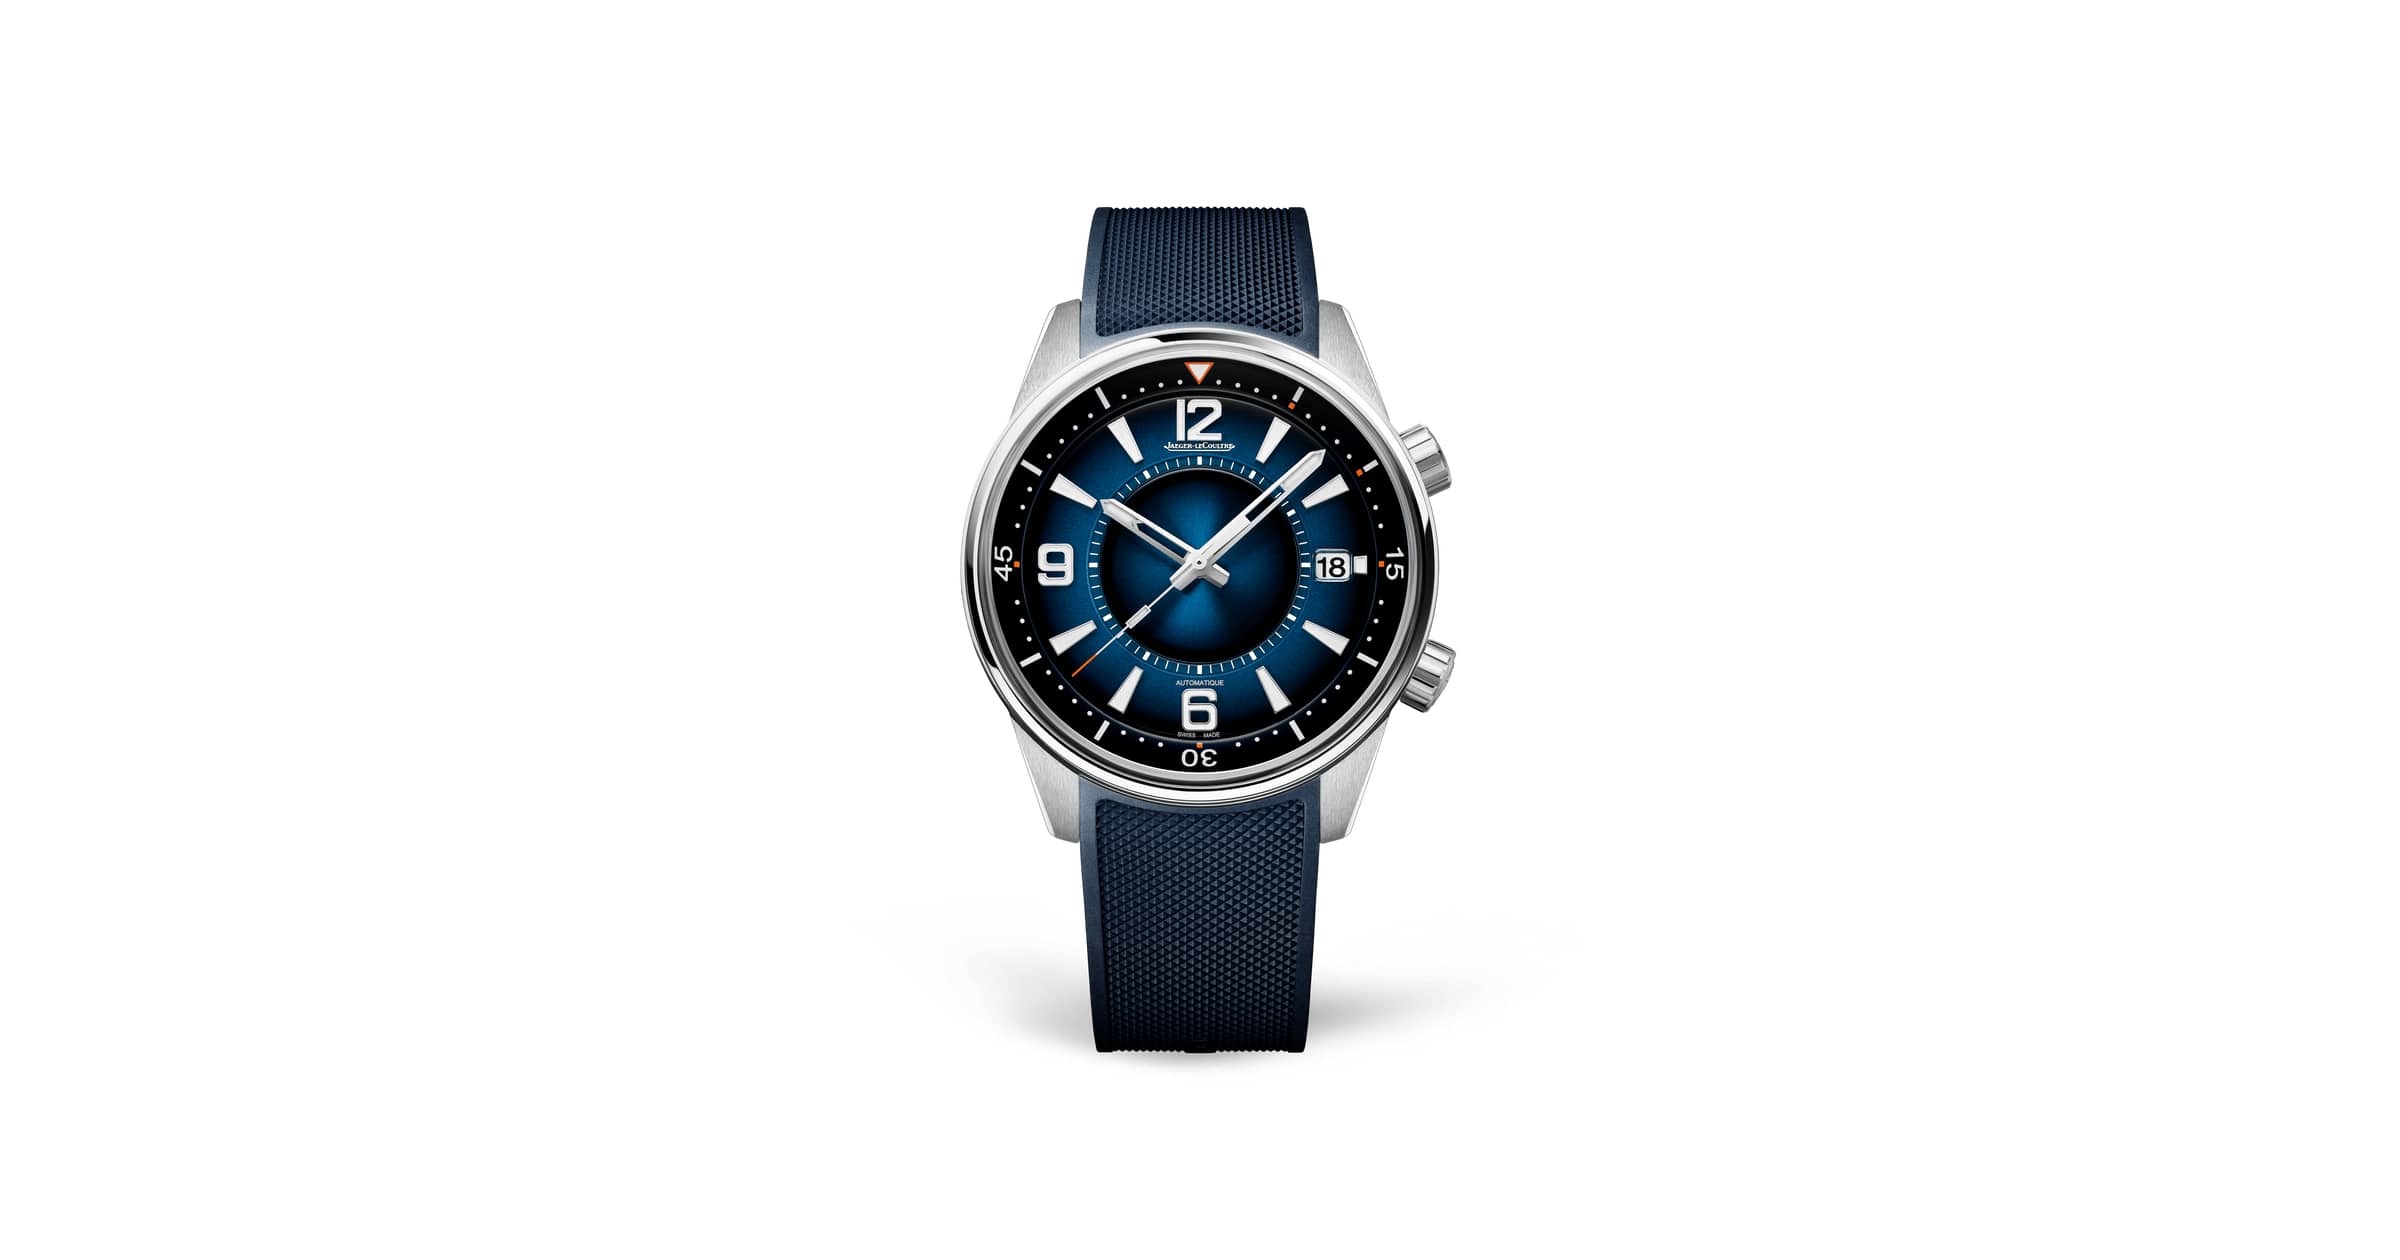 Jaeger-LeCoultre Polaris Date Limited Edition Q9068681 | lupon.gov.ph